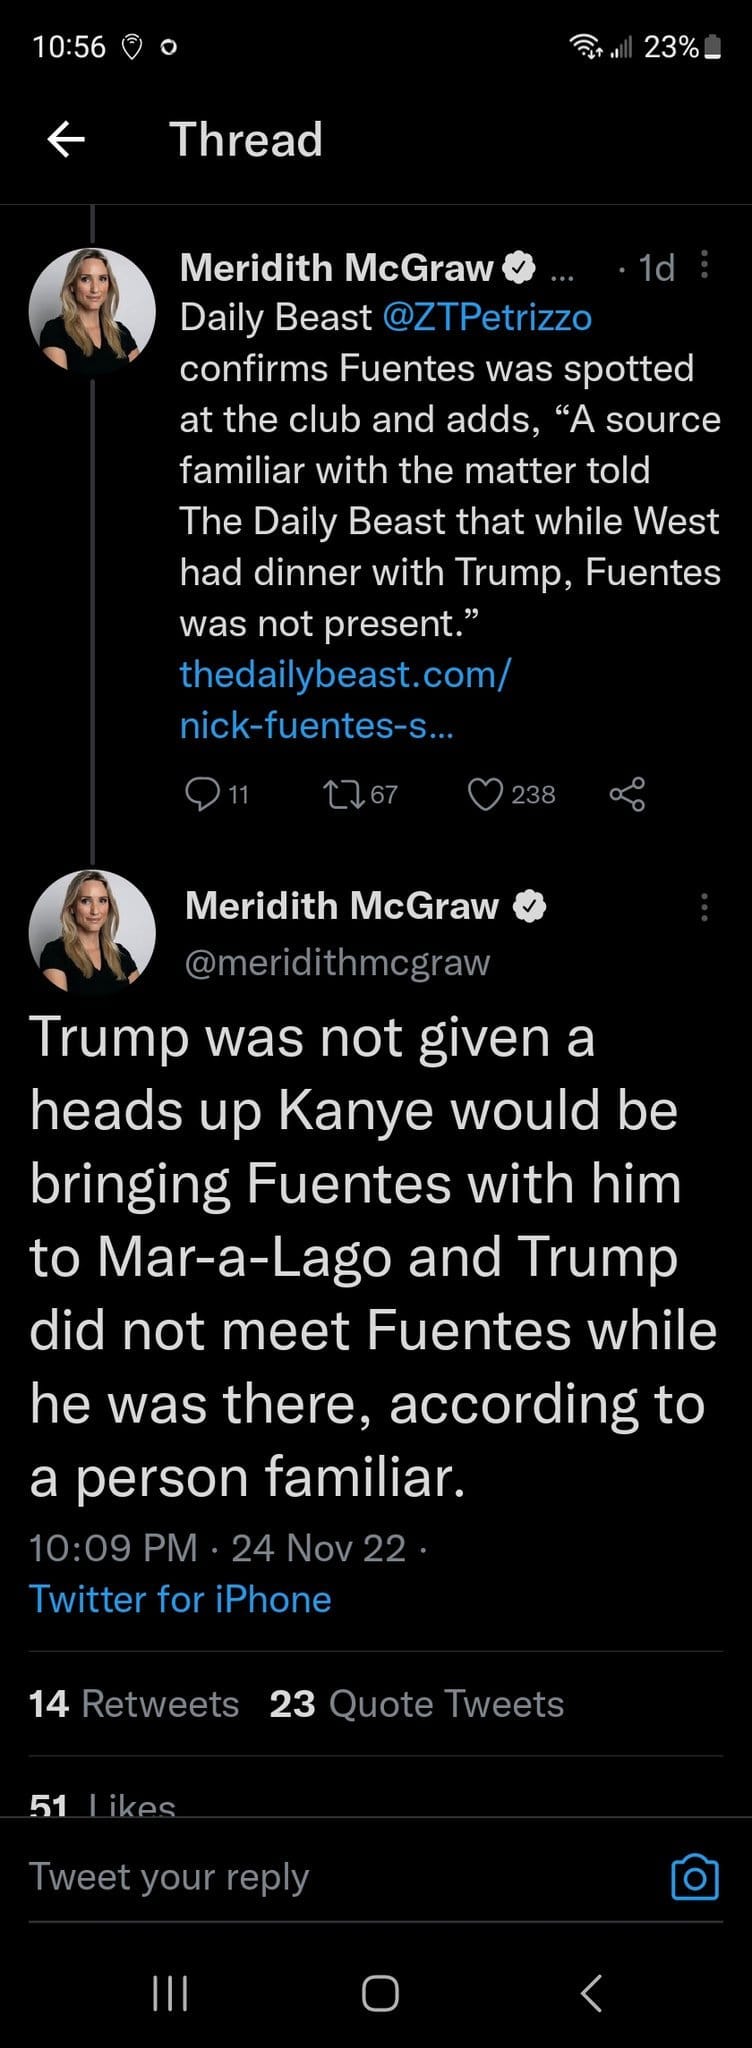 May be a Twitter screenshot of 2 people and text that says '10:56 23%_ Thread Meridith McGraw Daily Beast @ZTPetriz confirms Fuentes was spotted at the club and adds, "A source familiar with the matter told The Daily Beast that while West had dinner with Trump, Fuentes was not present." thedailybeast.com nick-tuentes- S... Meridith McGraw @ er dith Trump was not given a heads up Kanye would be bringing Fuentes with him to Mar-a-Lago and Trump did not meet Fuentes while he was there, according to a person familiar. 10:09 PM 24Nov22 Twitter for iPhone 14 Retweets 23 uote Tweets 51 Tweet you eply'